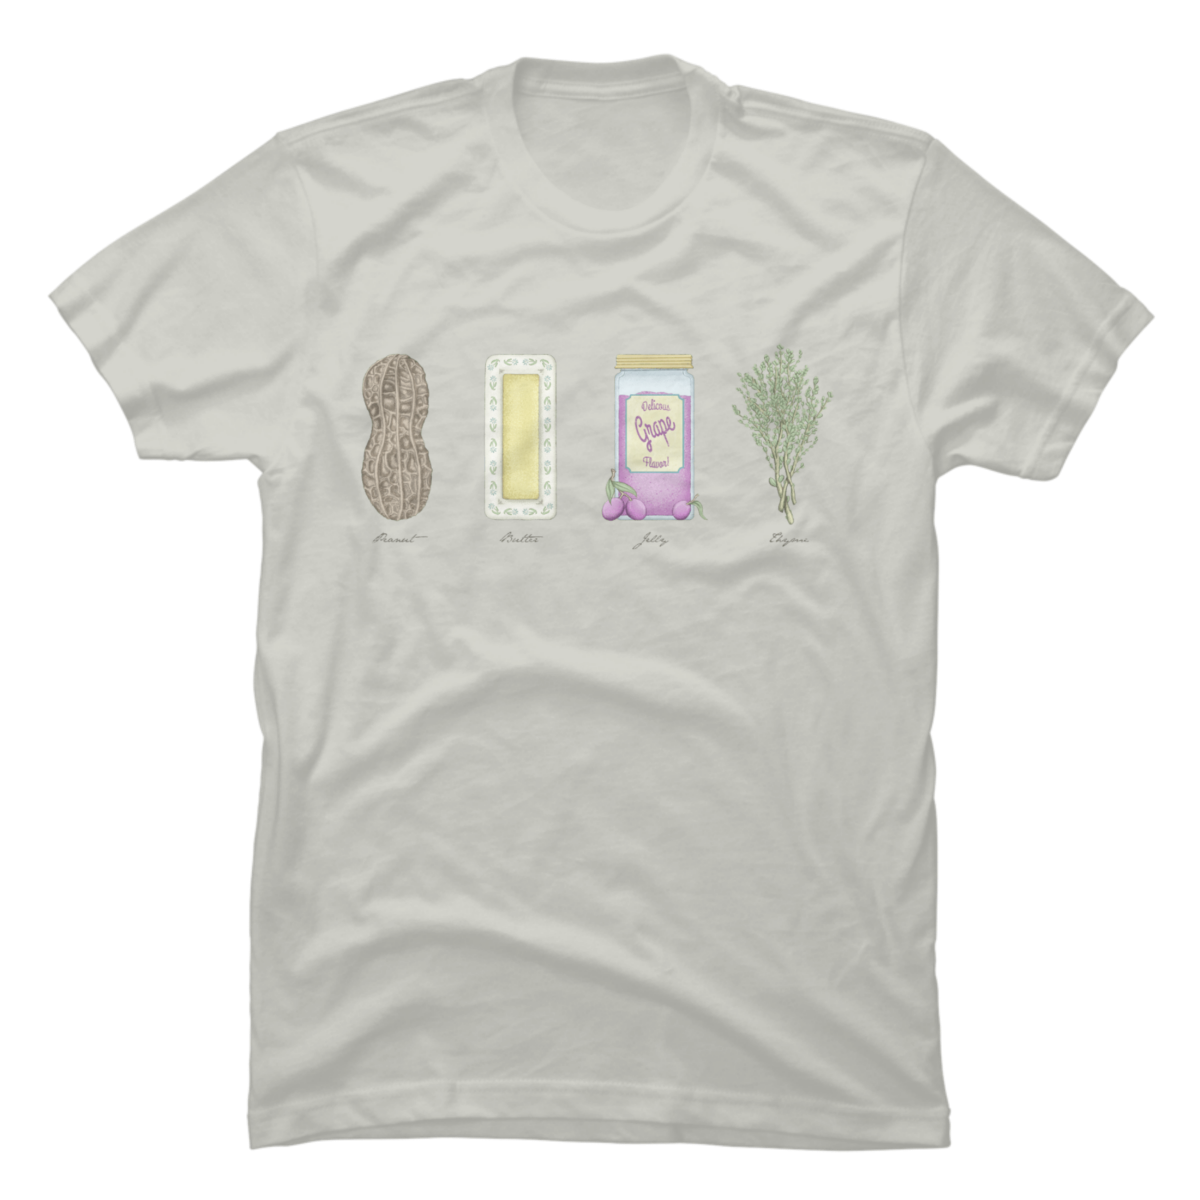 peanut butter and jelly t shirt